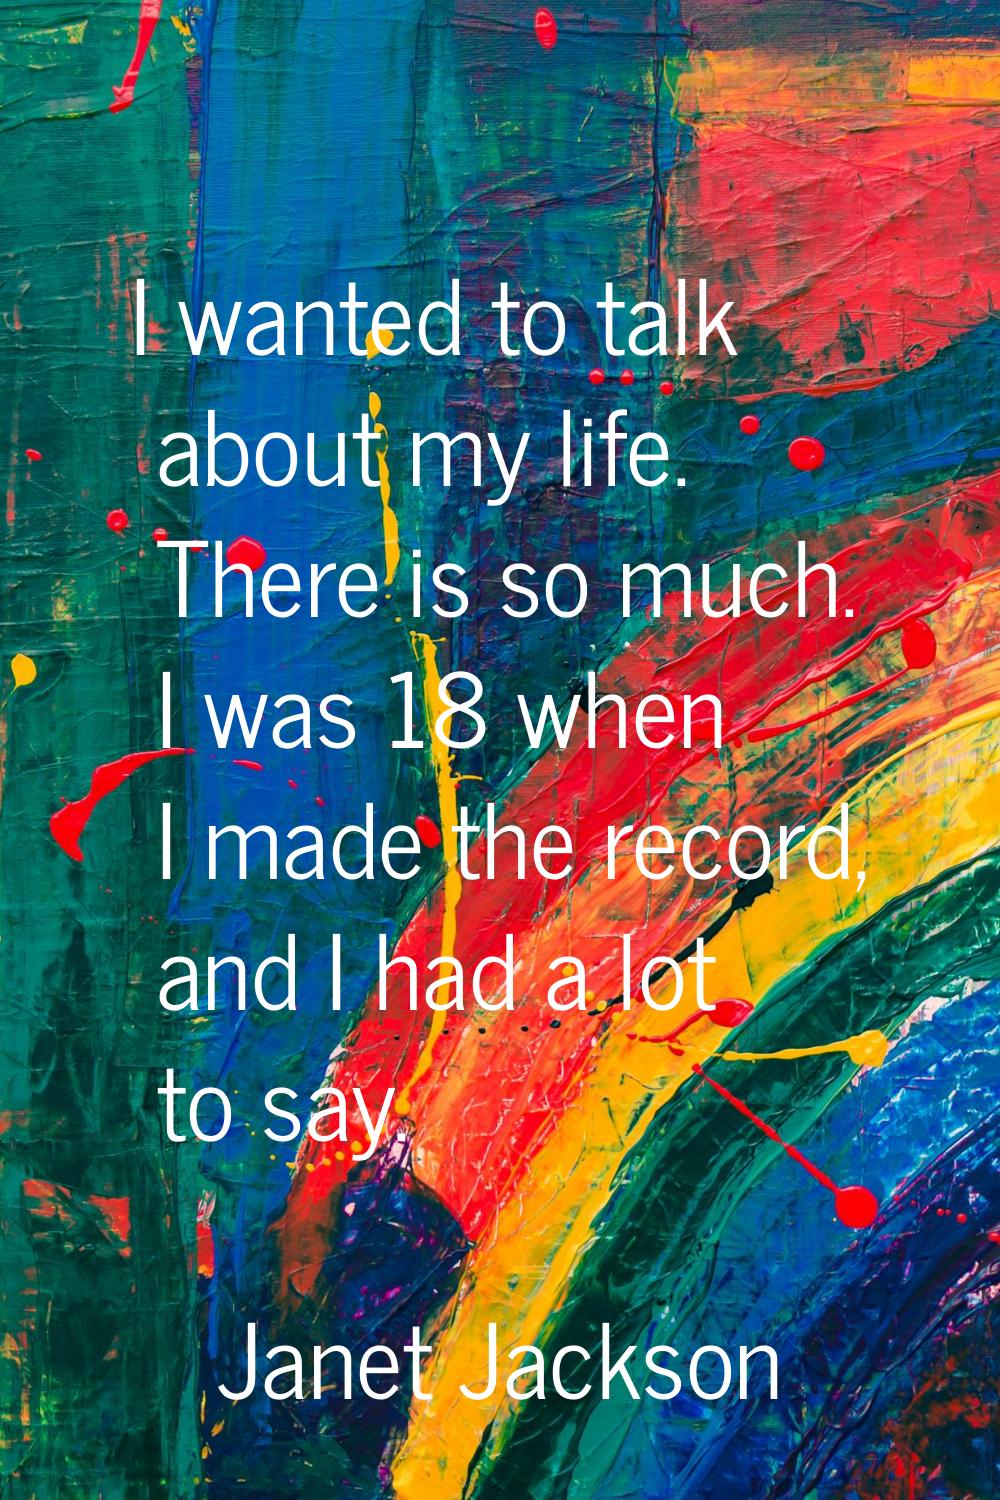 I wanted to talk about my life. There is so much. I was 18 when I made the record, and I had a lot 